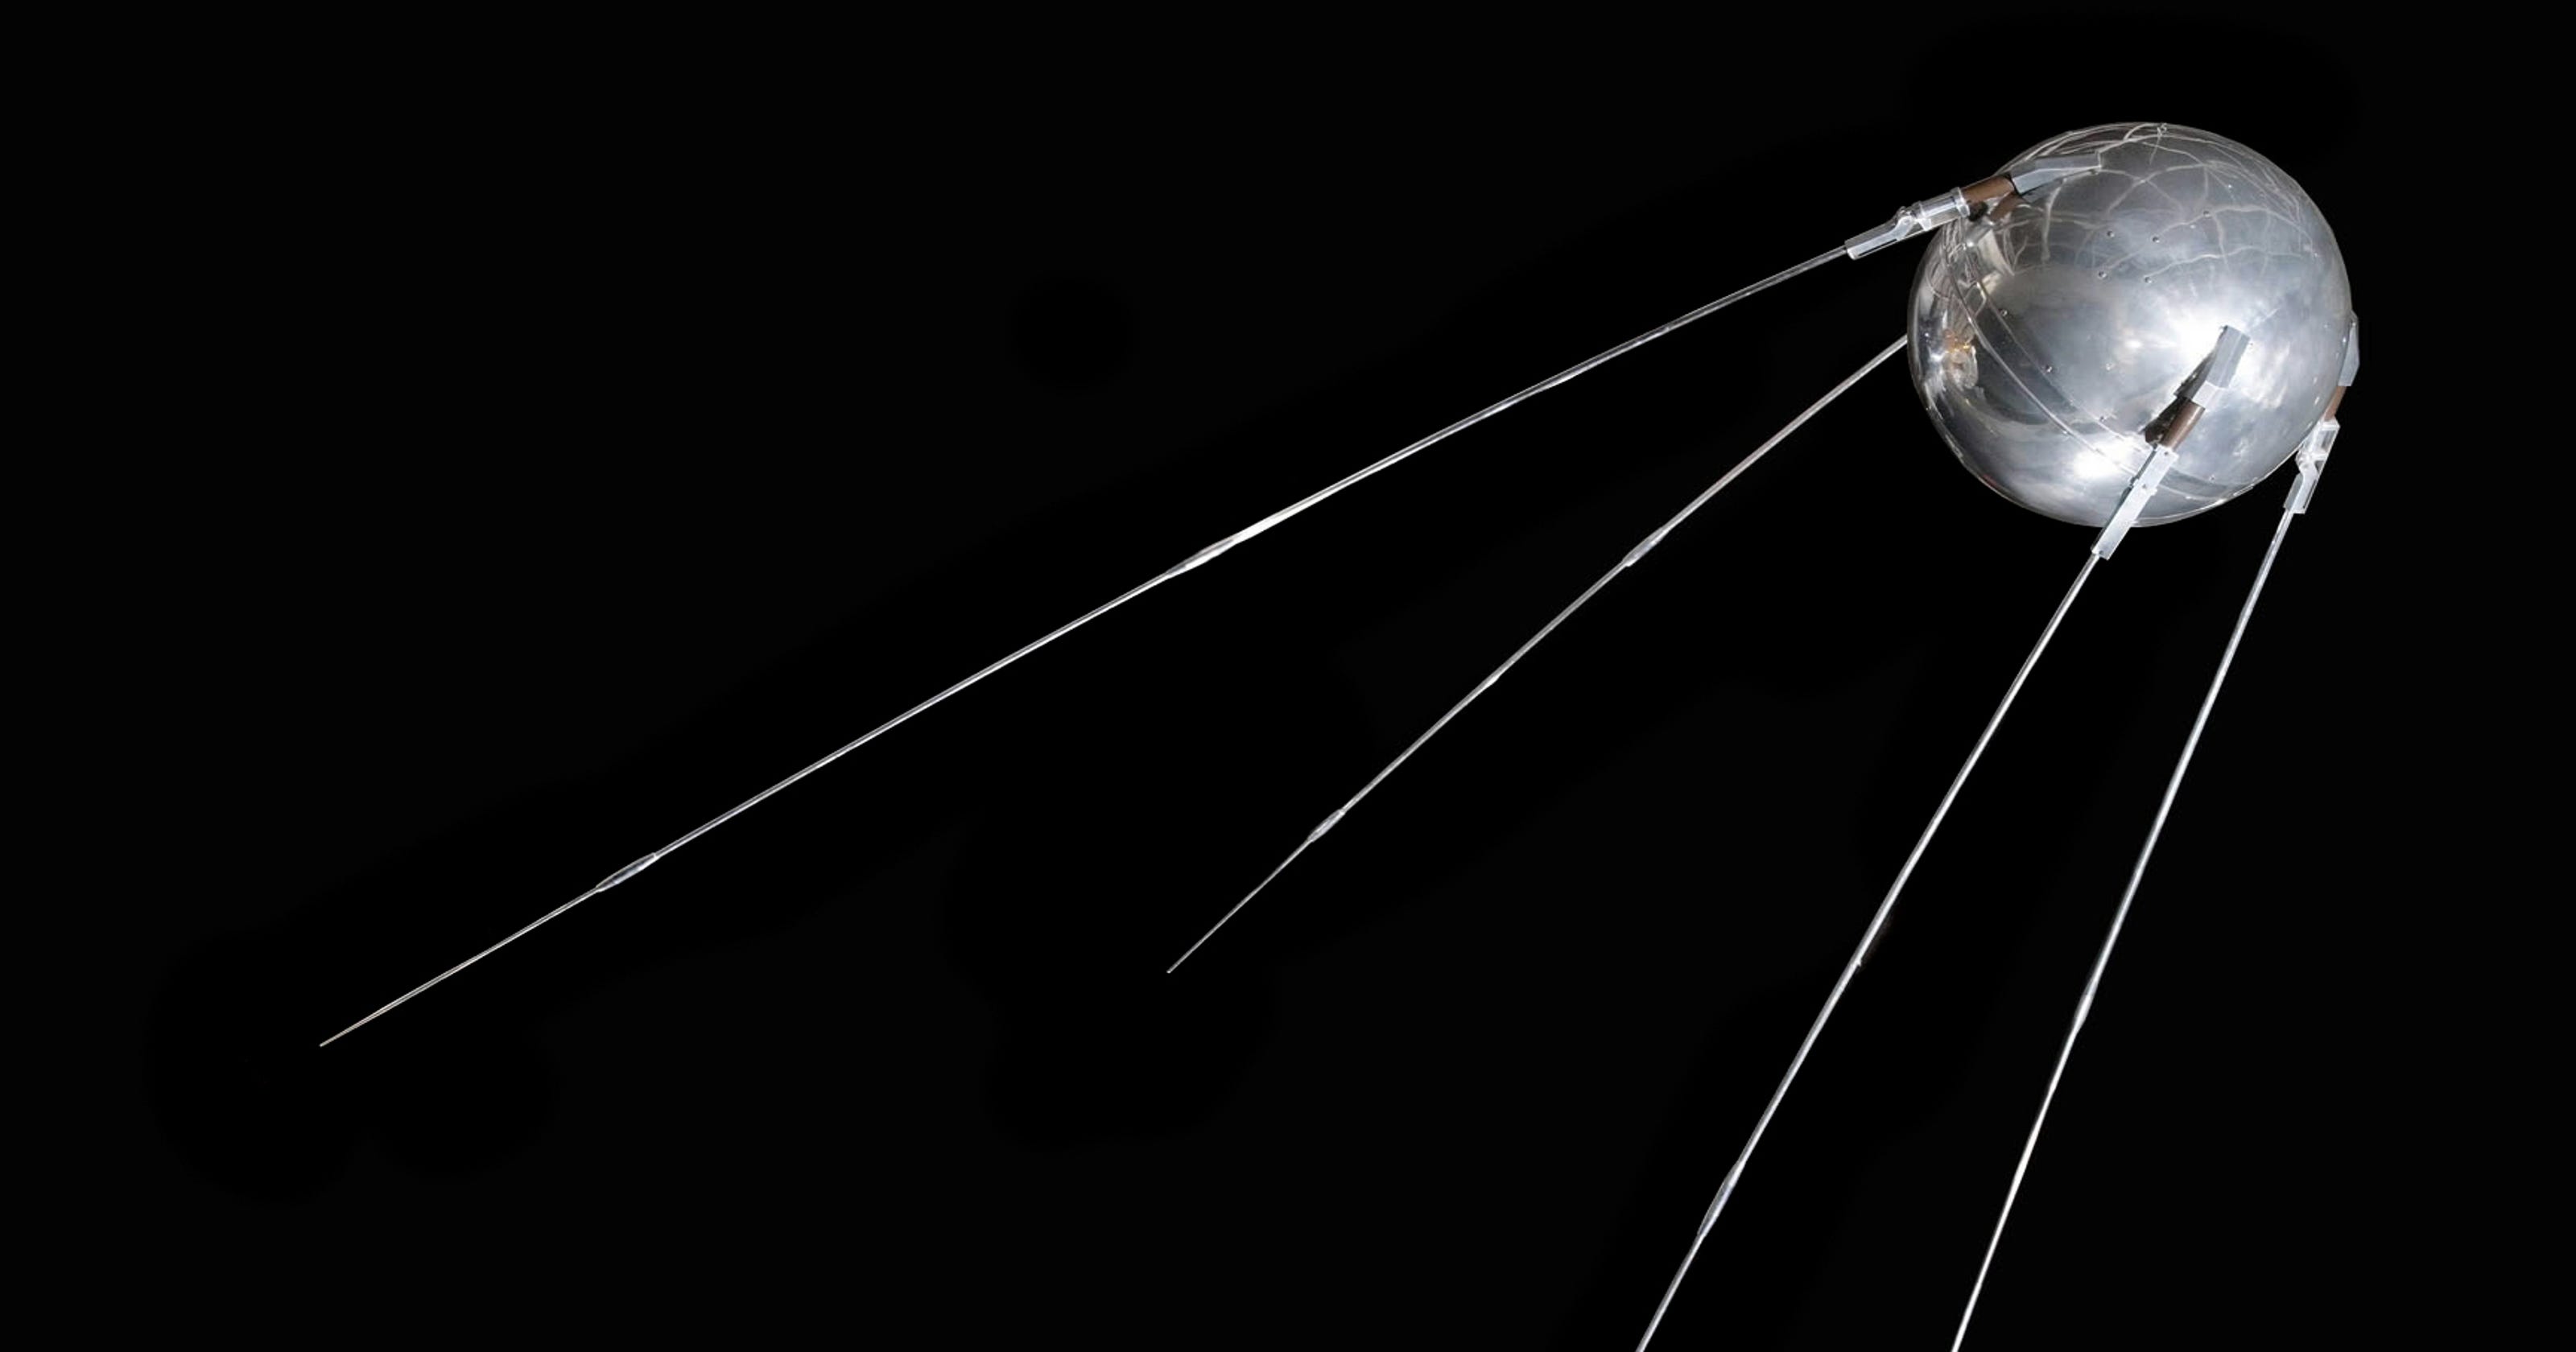 sputnik-first-man-made-satellite-launched-60-years-ago-today